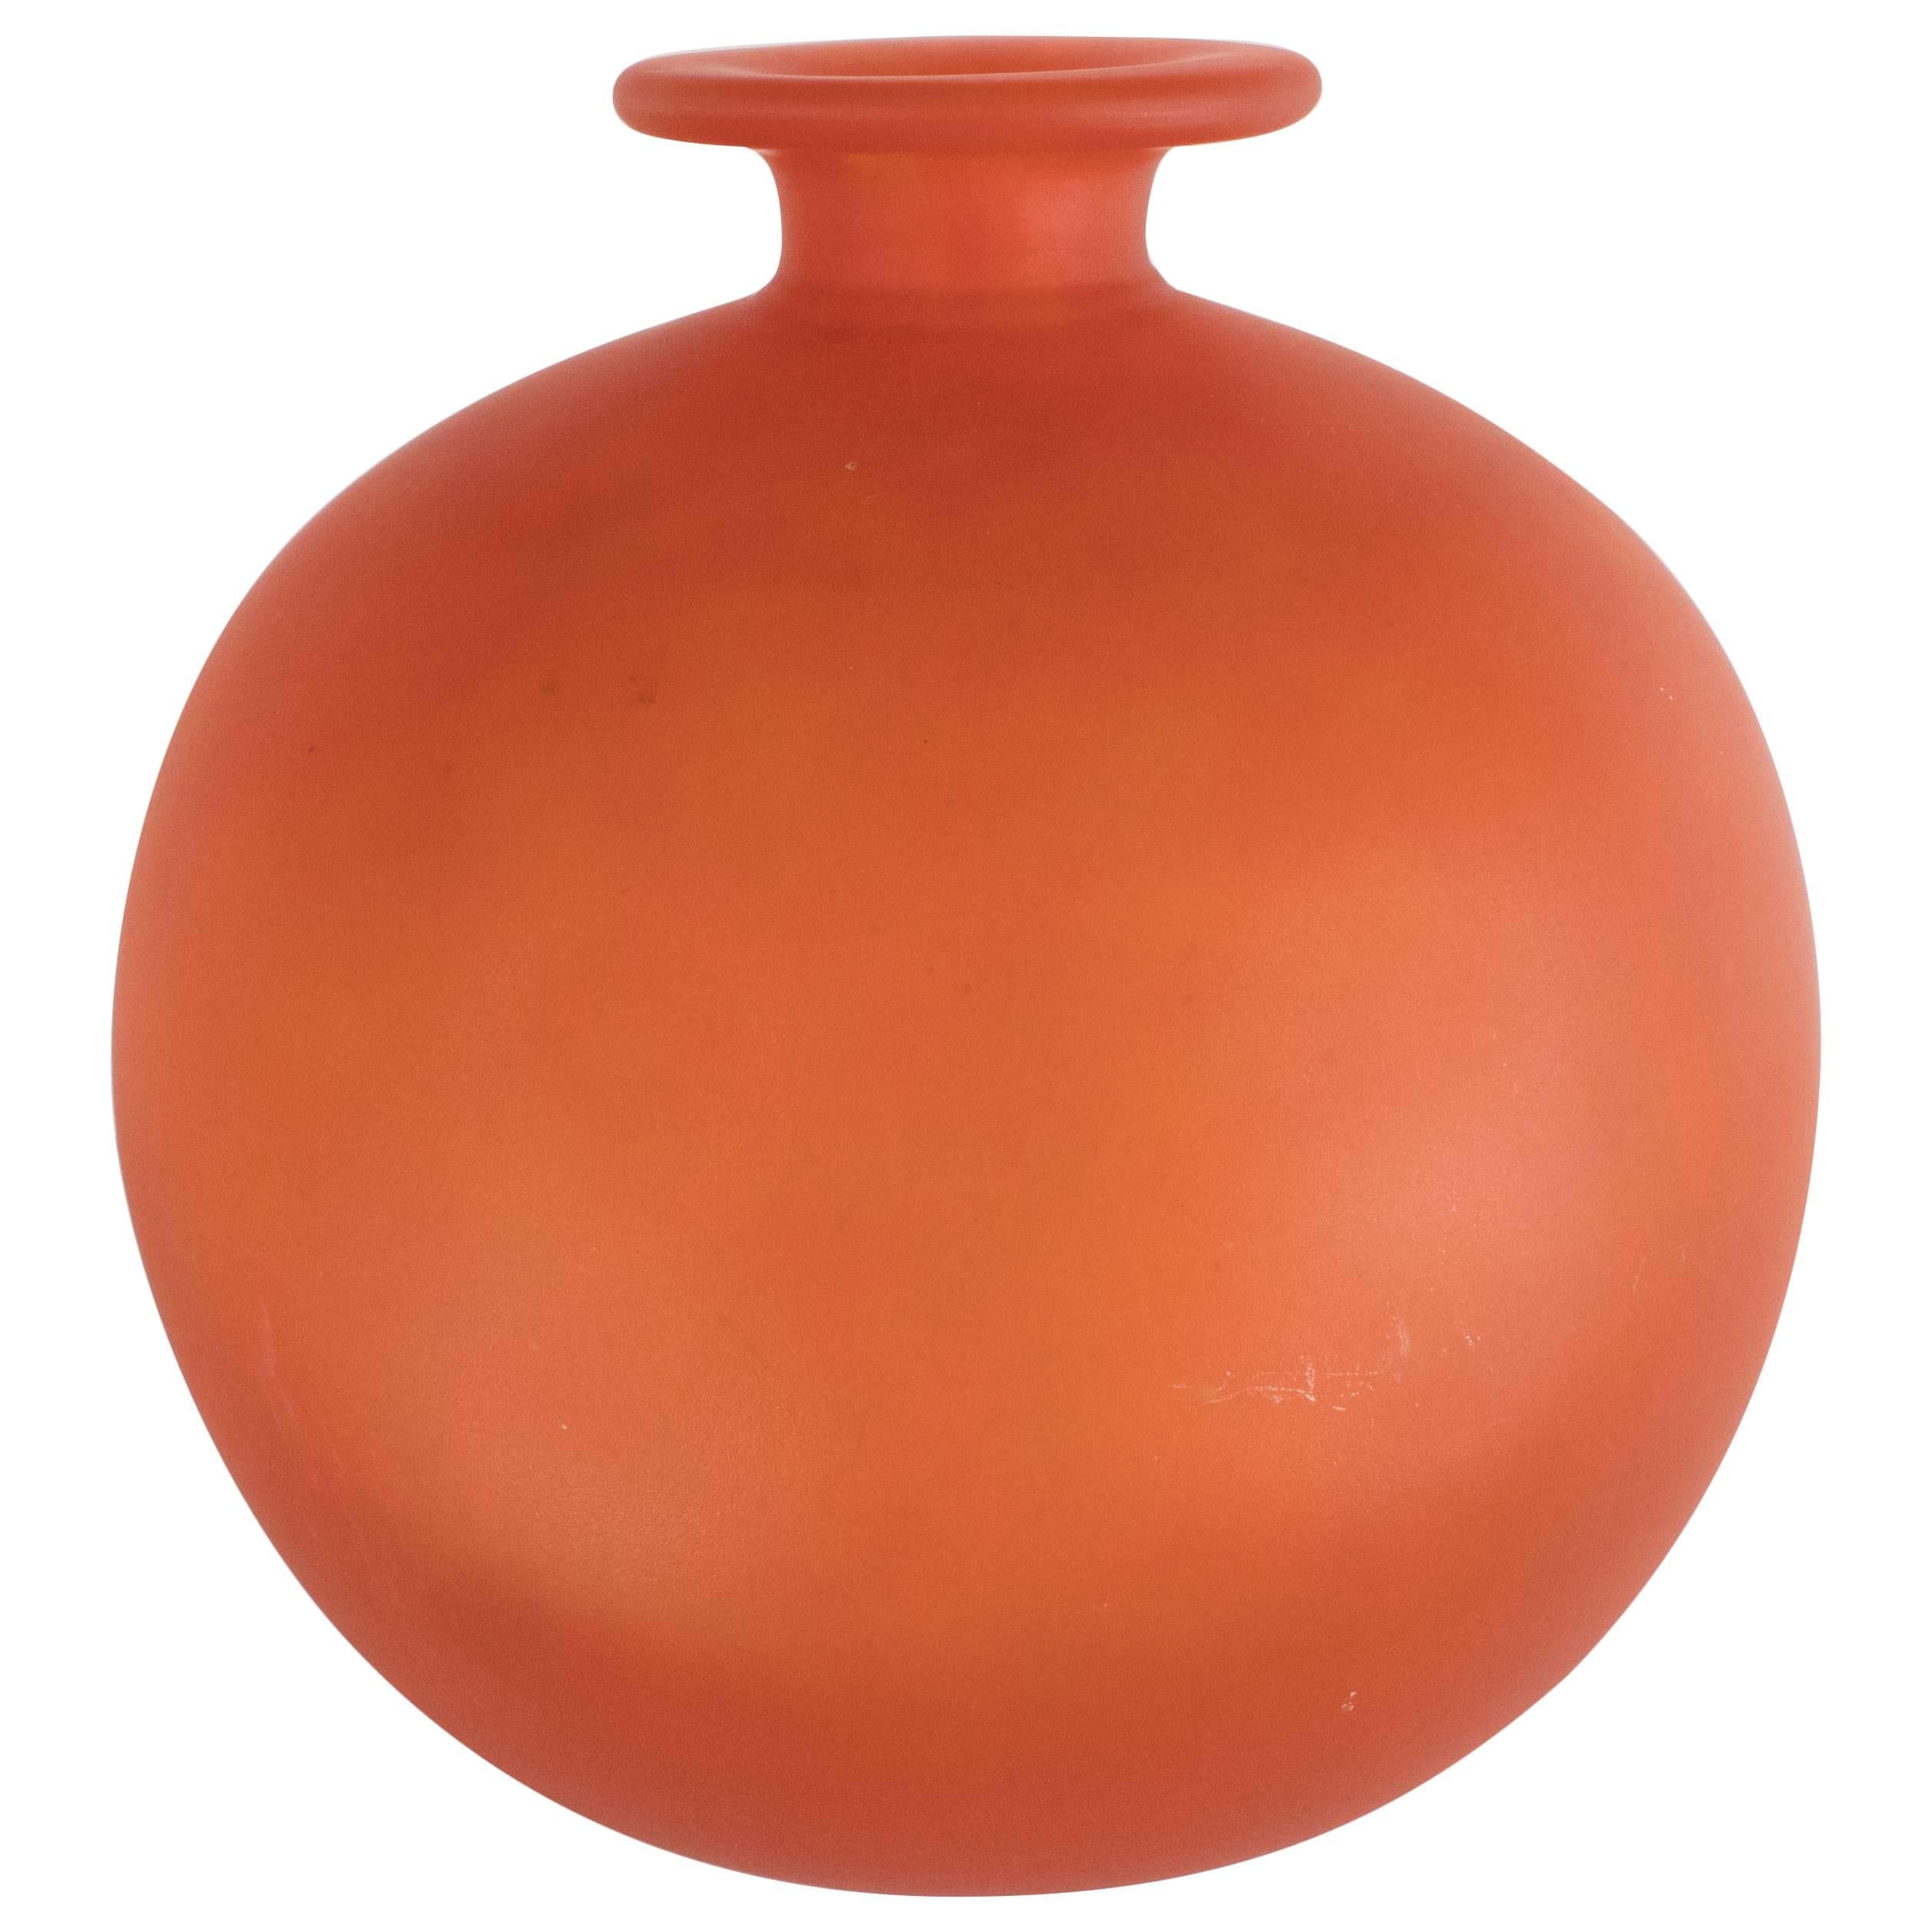 French Art Deco Vase in Opaque Persimmon Hue Signed by Charles Schneider